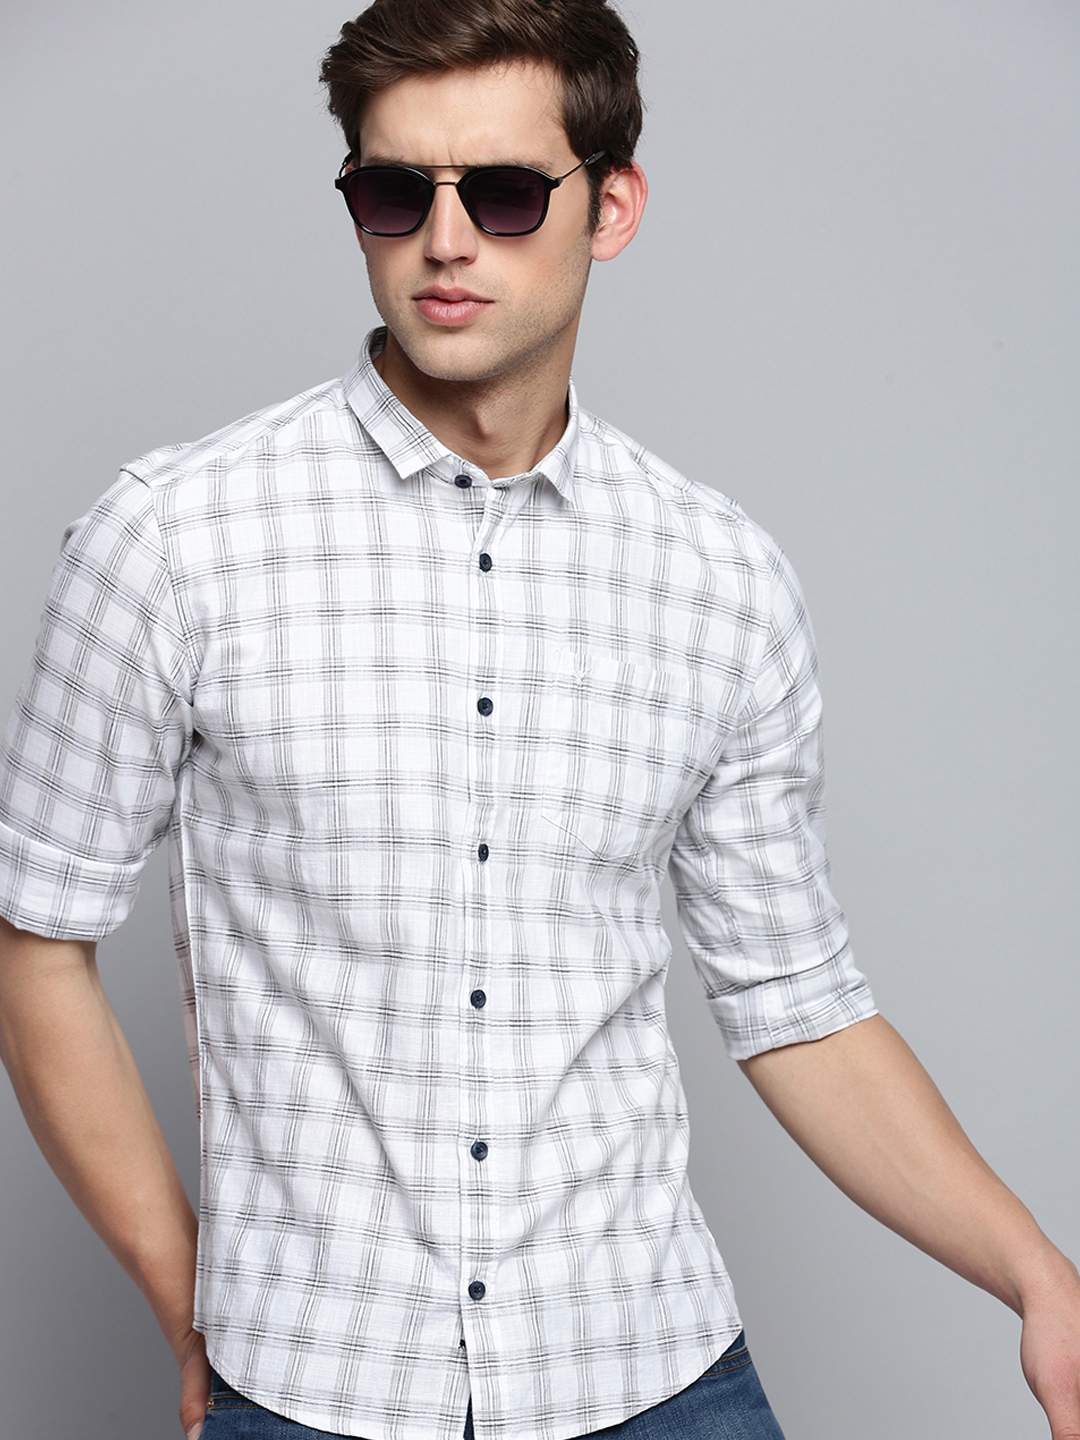 Showoff | SHOWOFF Men's Spread Collar Checked White Classic Shirt 0